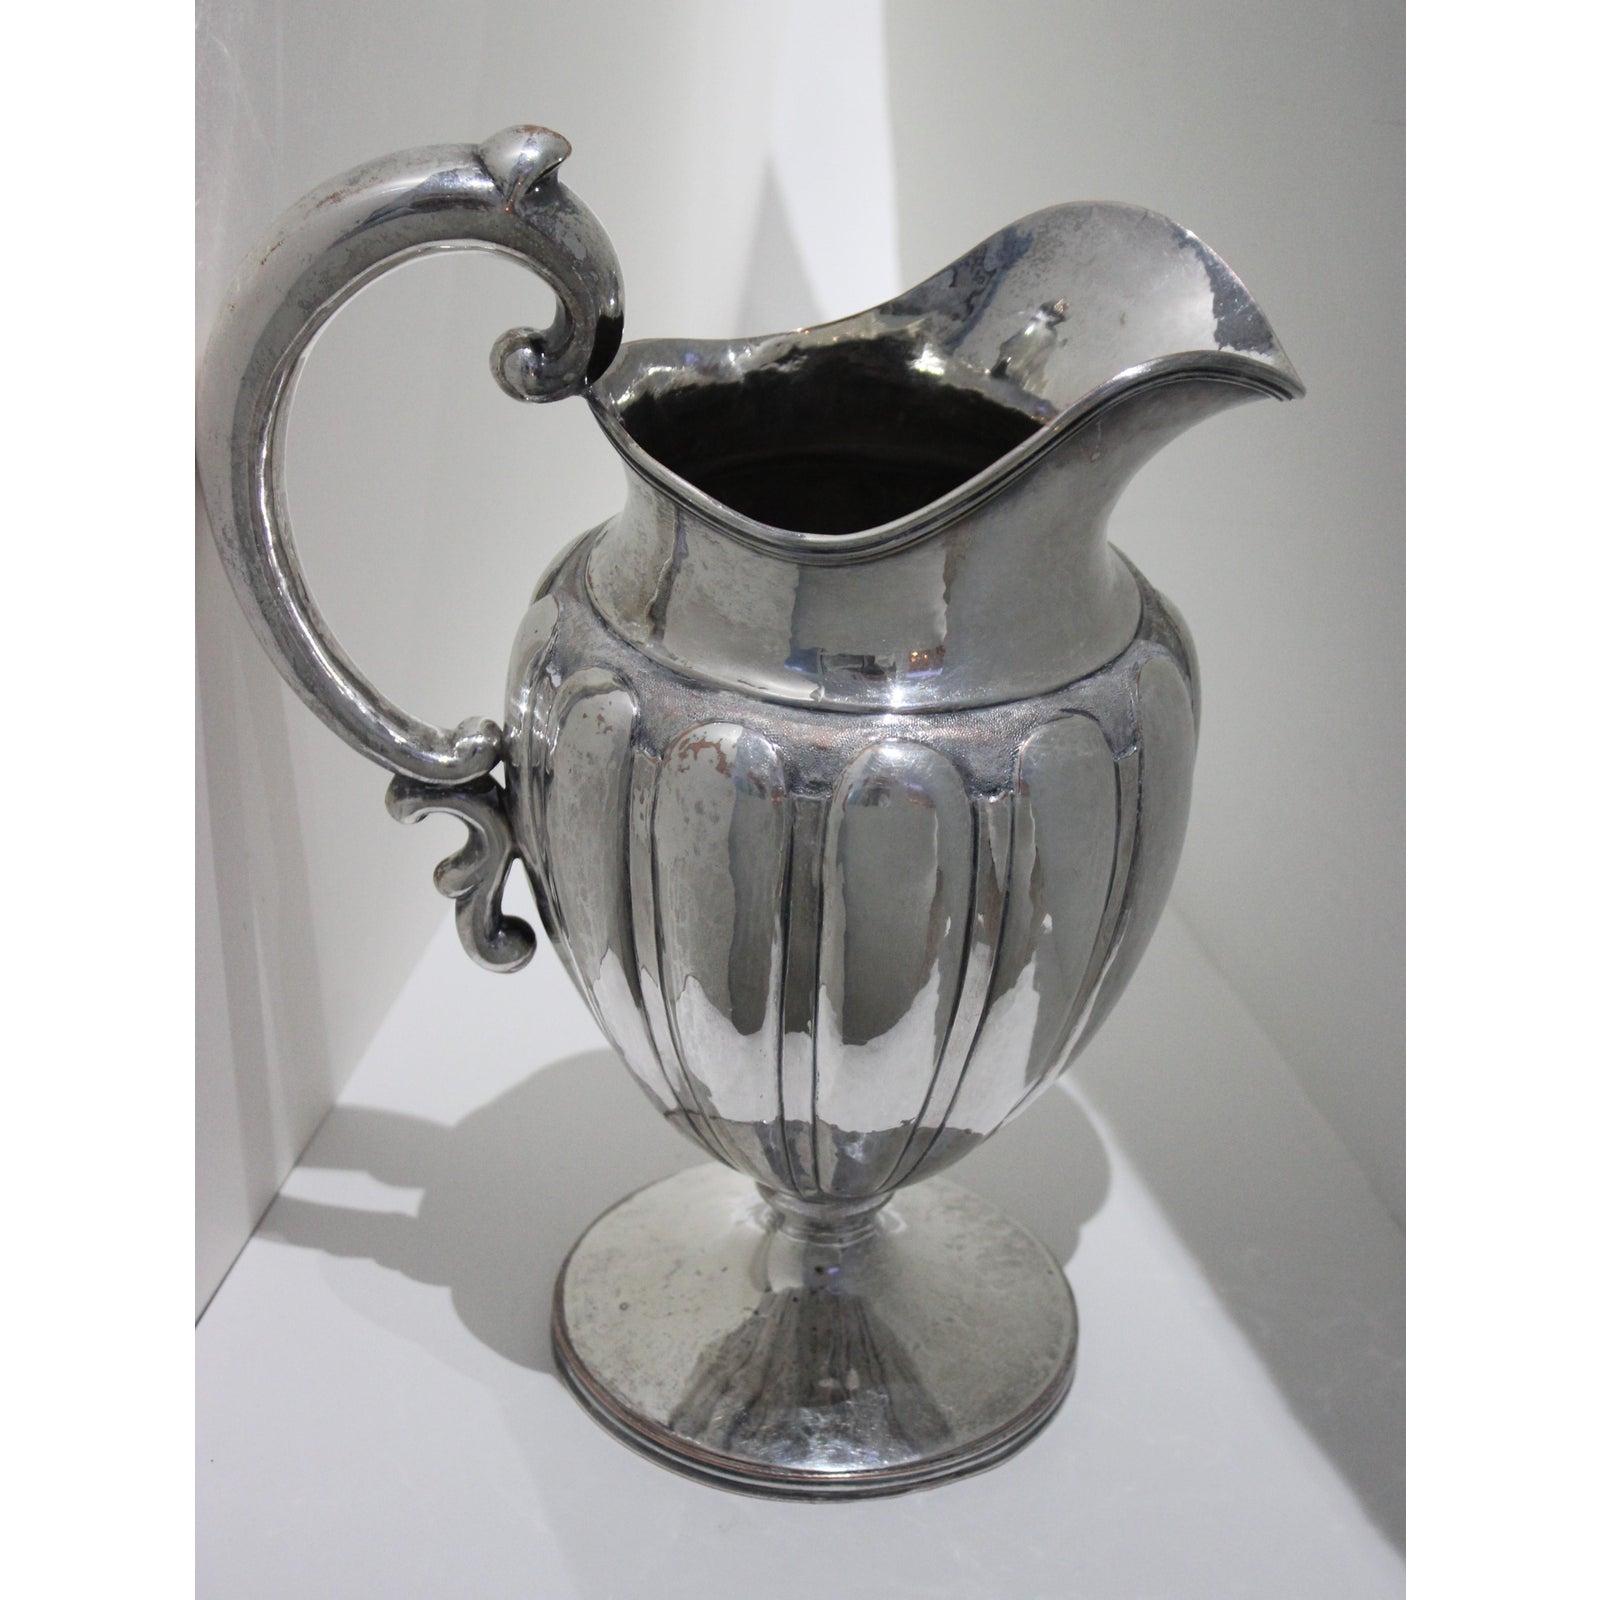 This stylish and Classic melon-form silver plated over copper water pitcher will make a great addition to your barware collection and of course a special place on your holiday table settings.

Note: There is some loss of silver-plate over the